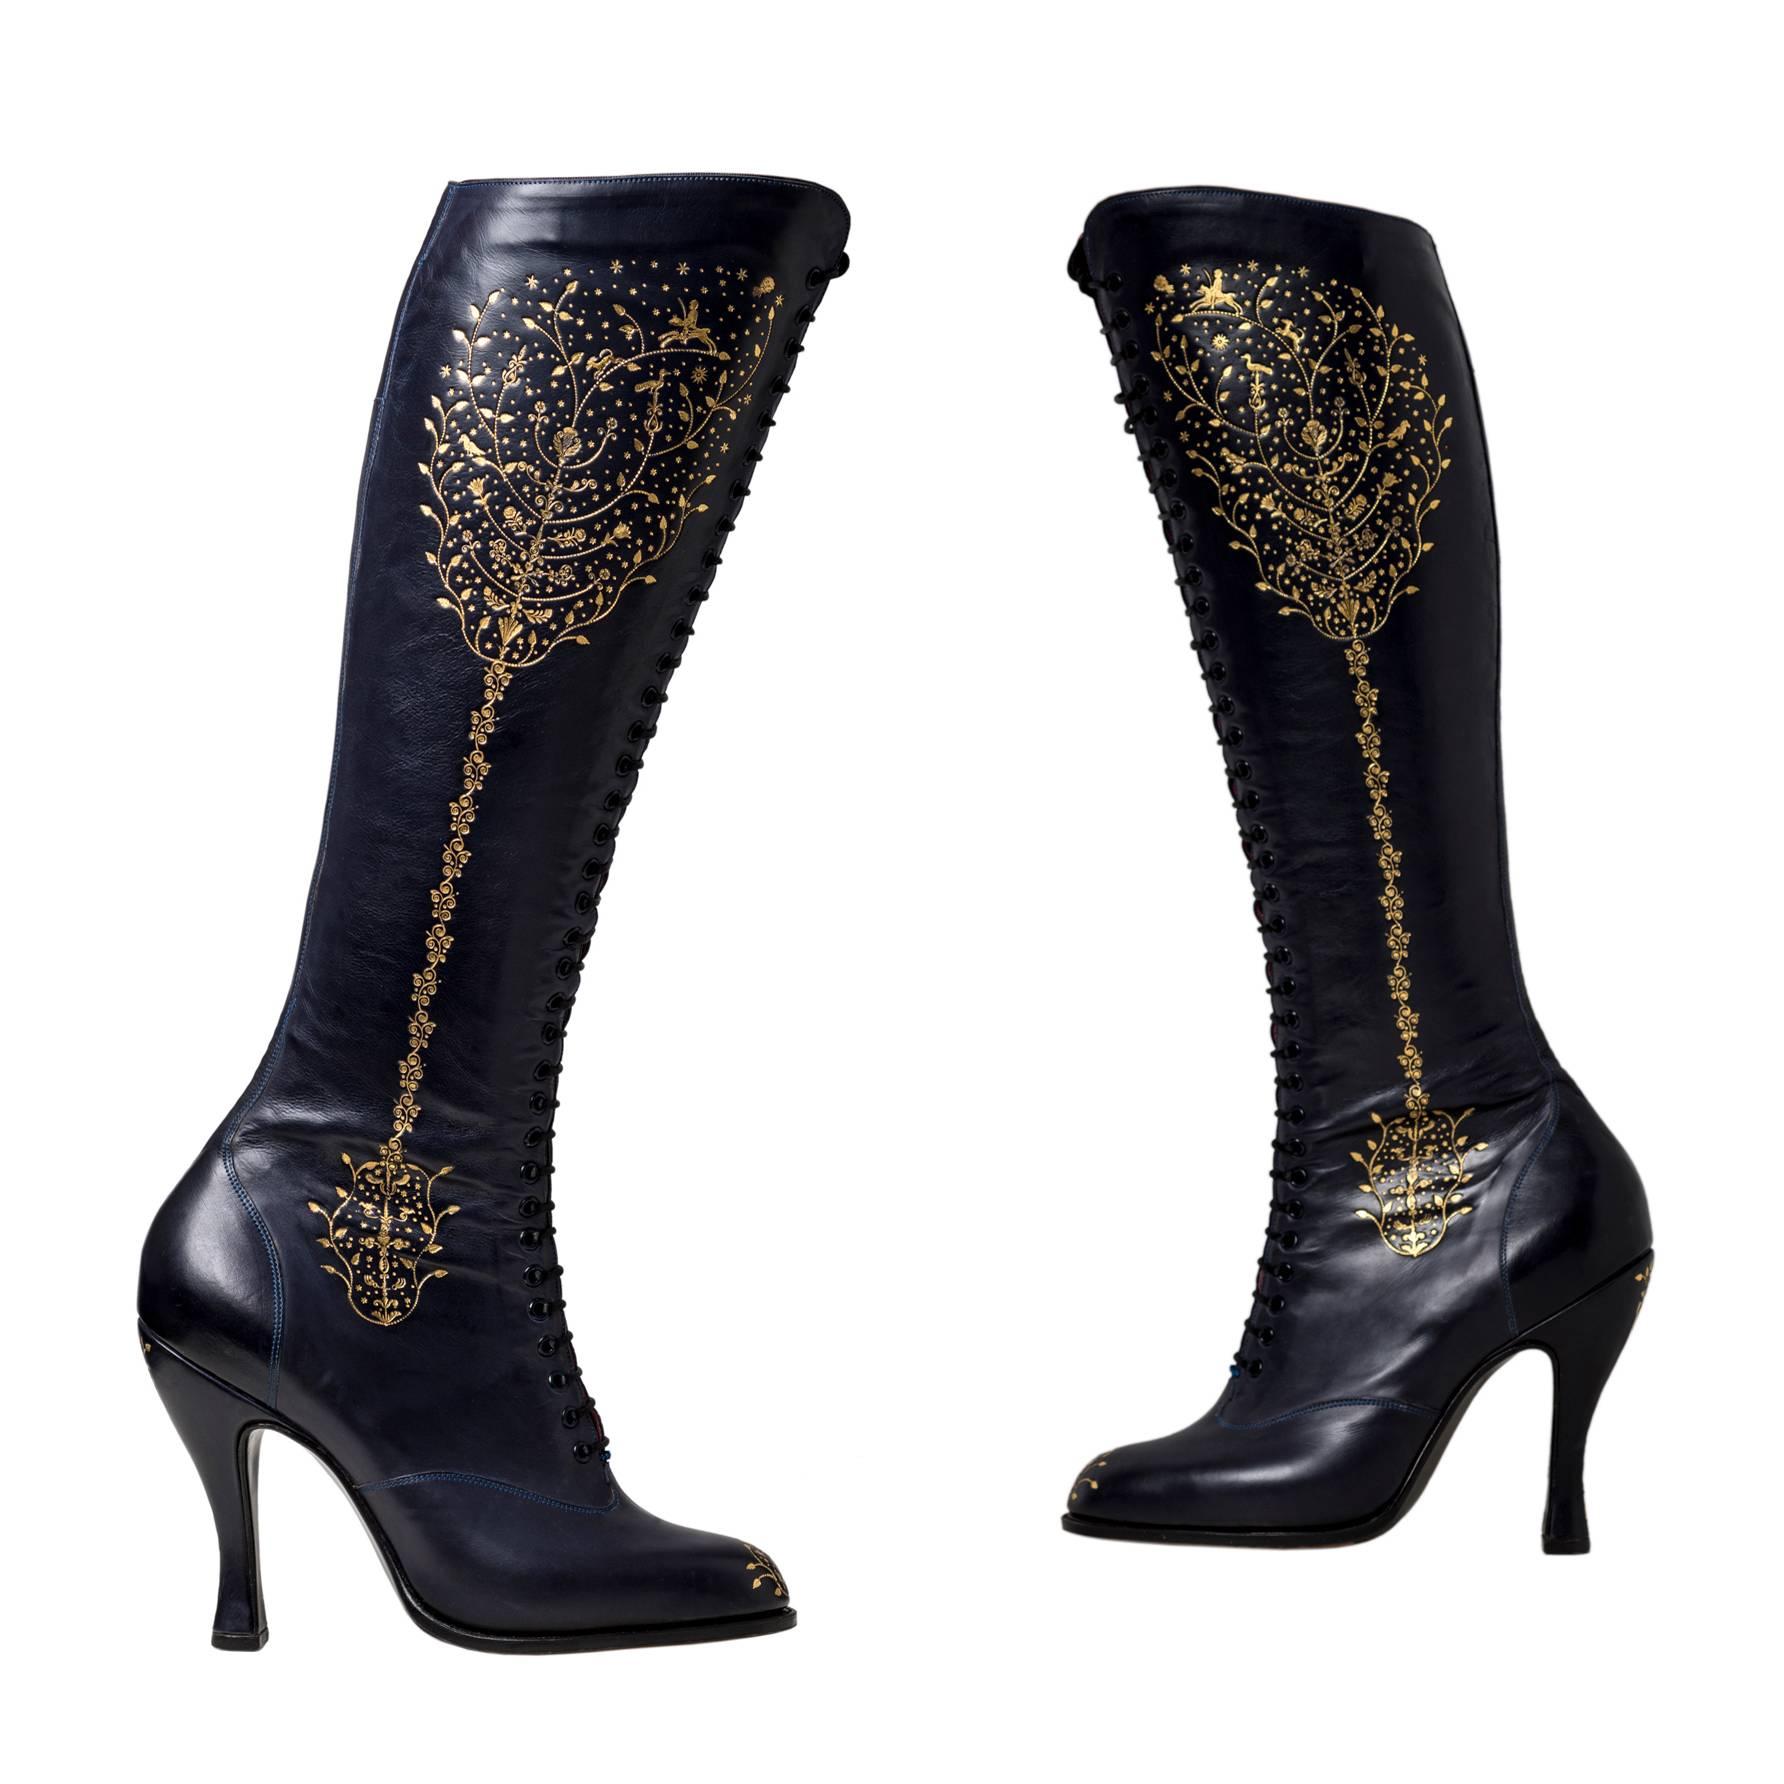 Anastasia. Leather full length lace-up boots hand tooled with 22 carat gold For Sale